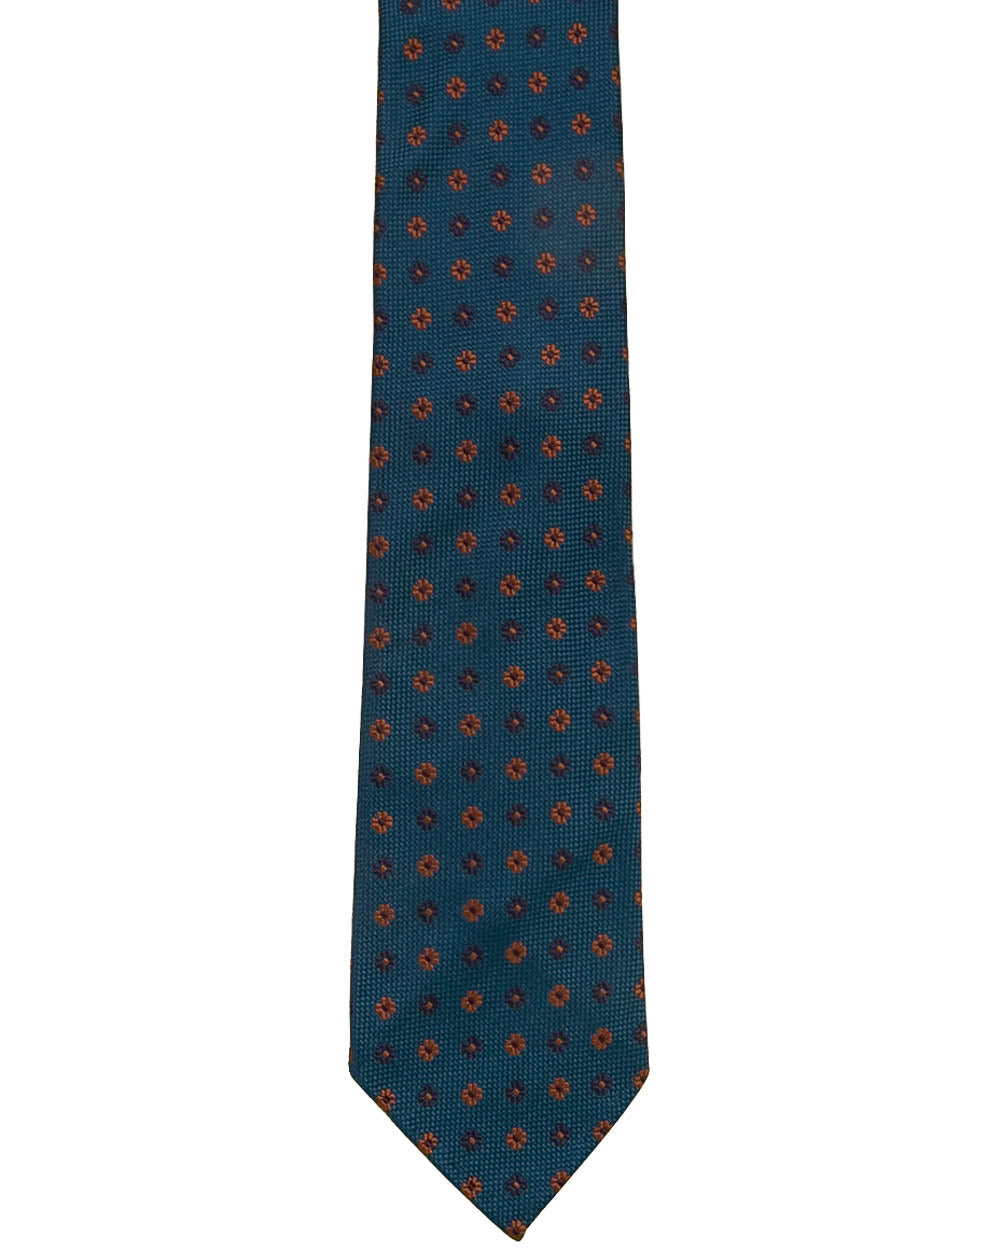 Teal with Navy and Rust Floral Tie